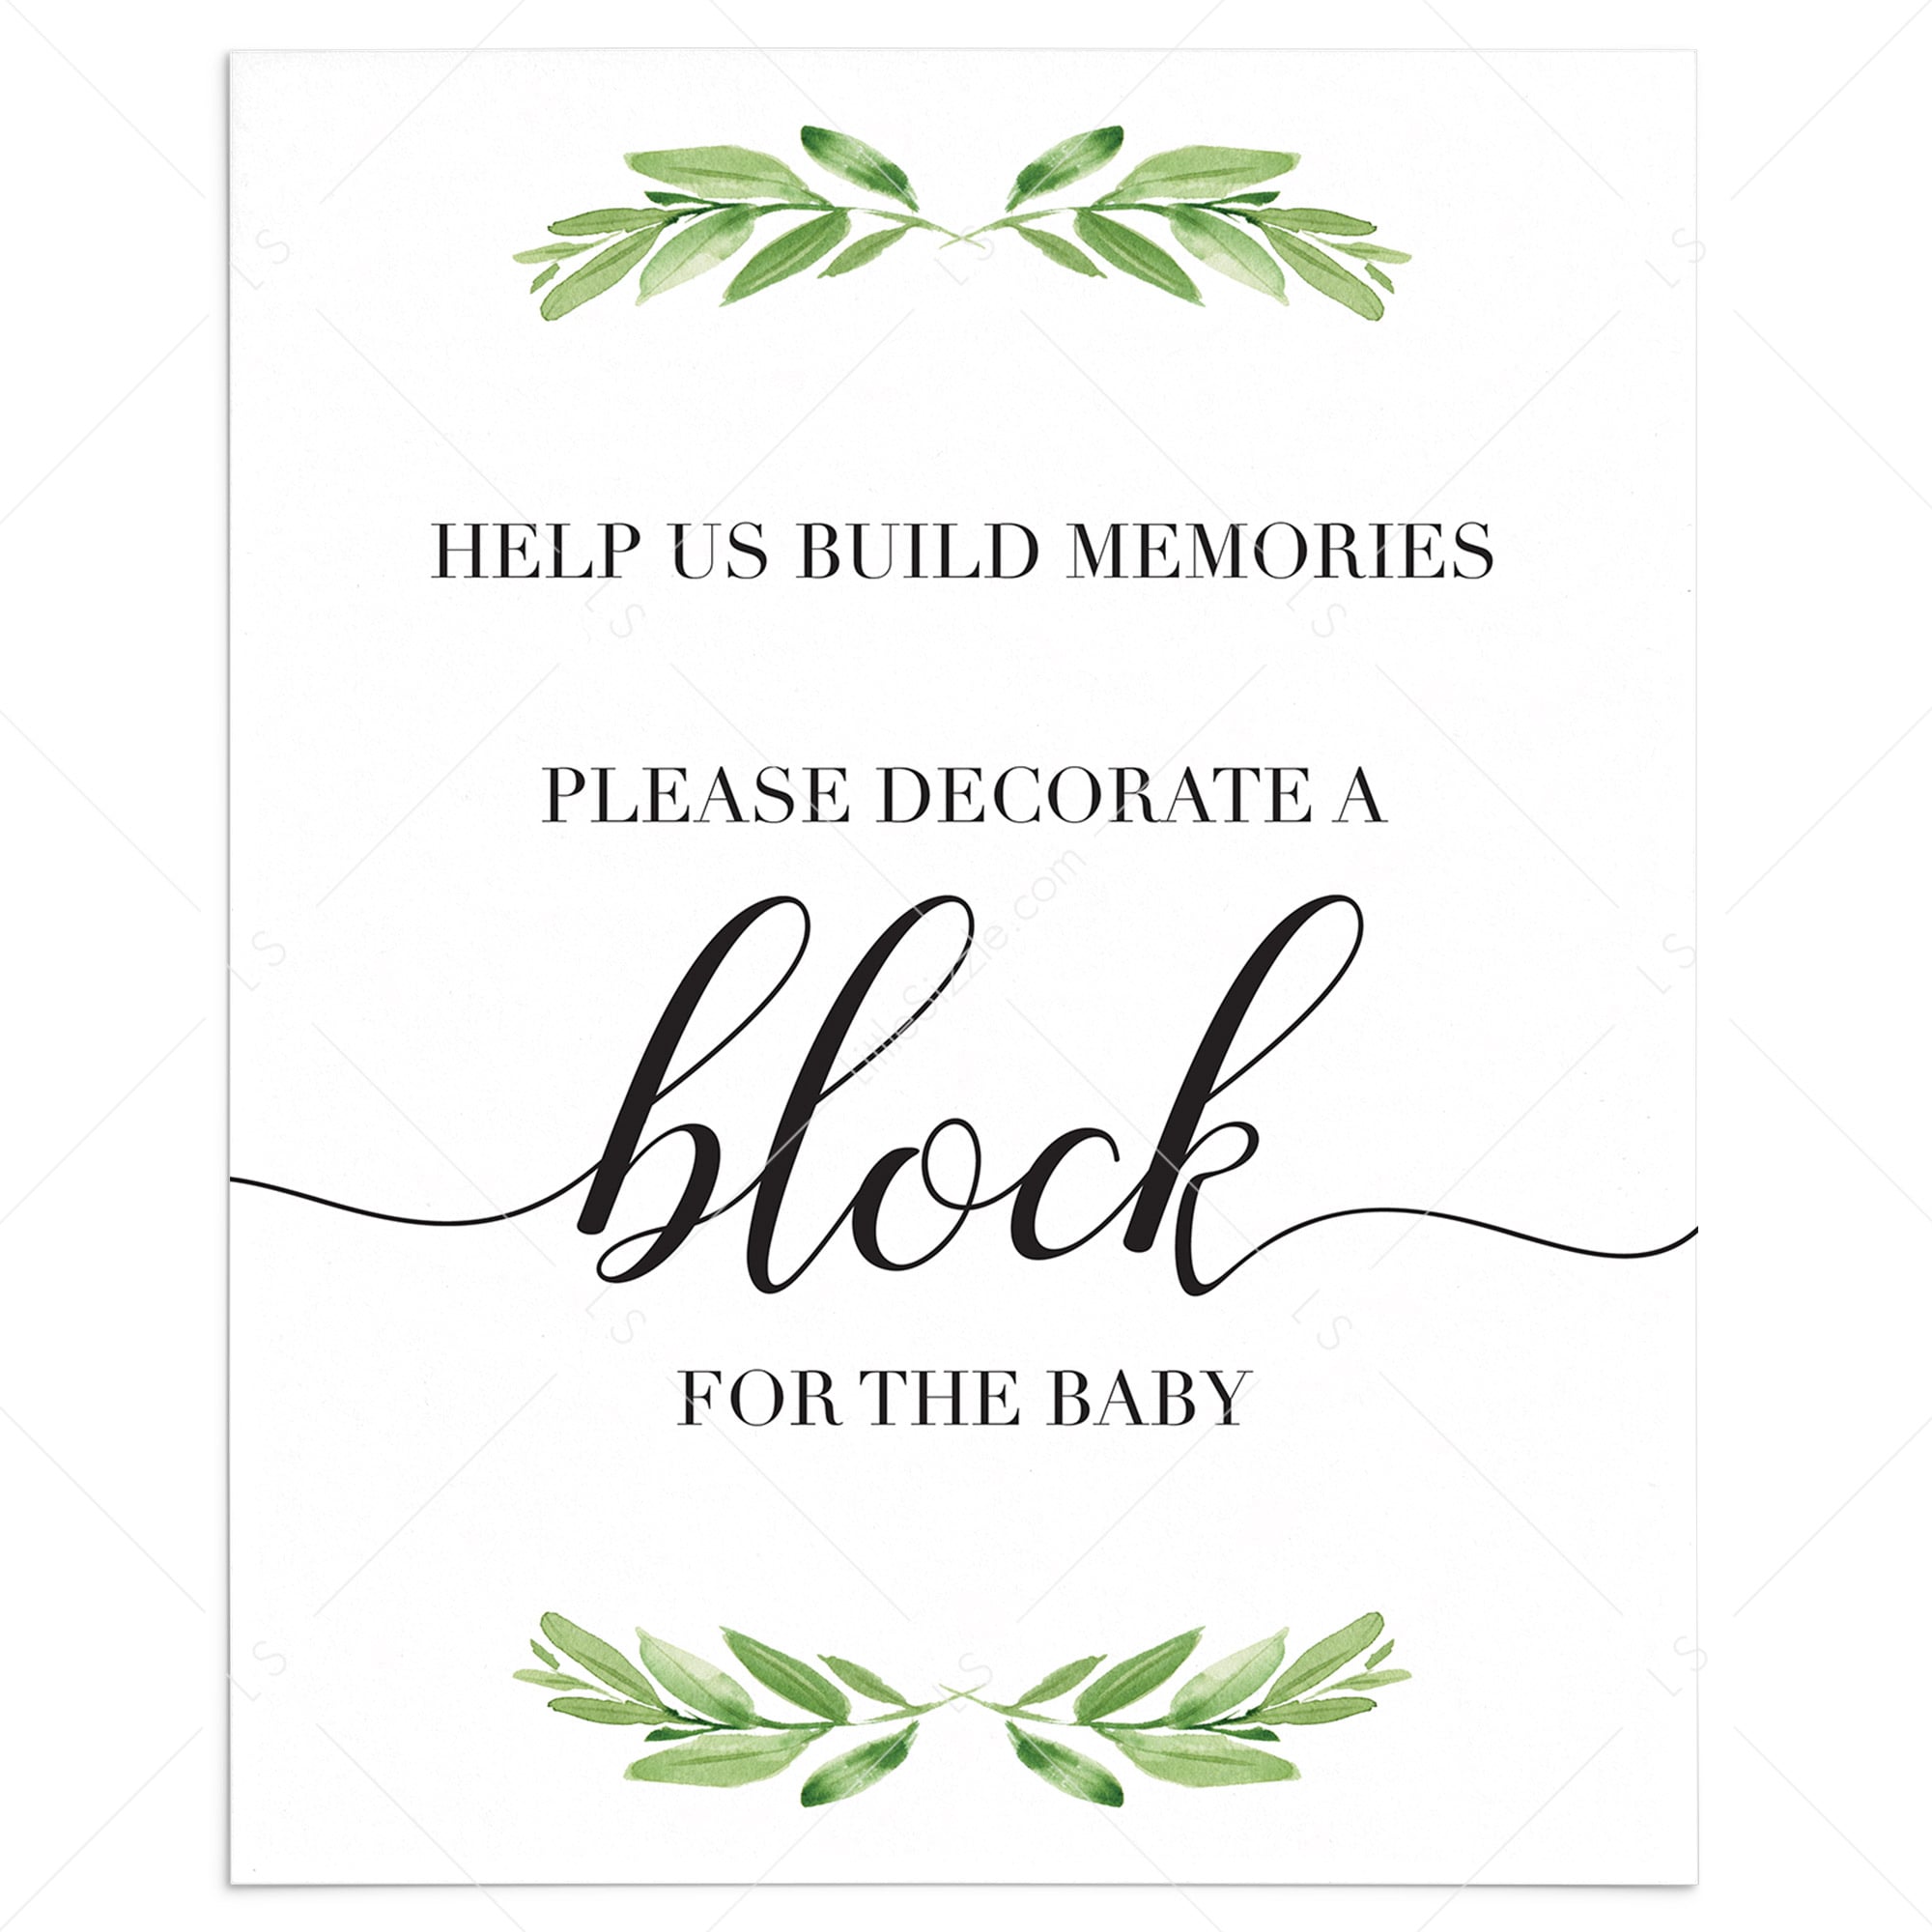 Decorate a block game for greenery baby shower by LittleSizzle